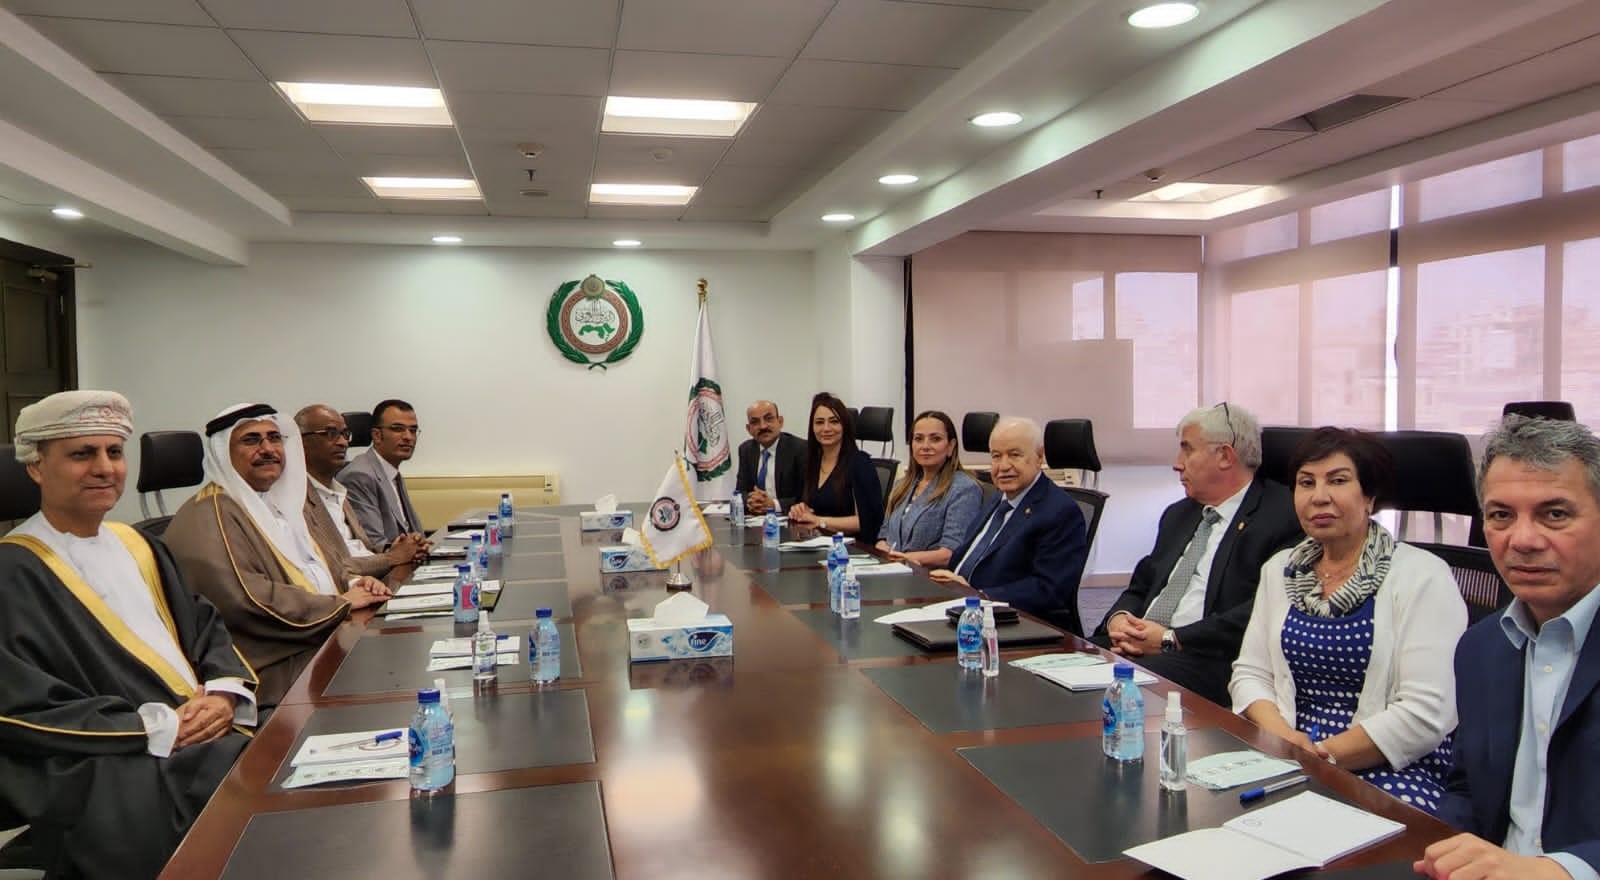 Mr. Al-Asoomi and Dr. Abu-Ghazaleh Discuss Areas of Cooperation between the Arab Parliament and TAG.Global